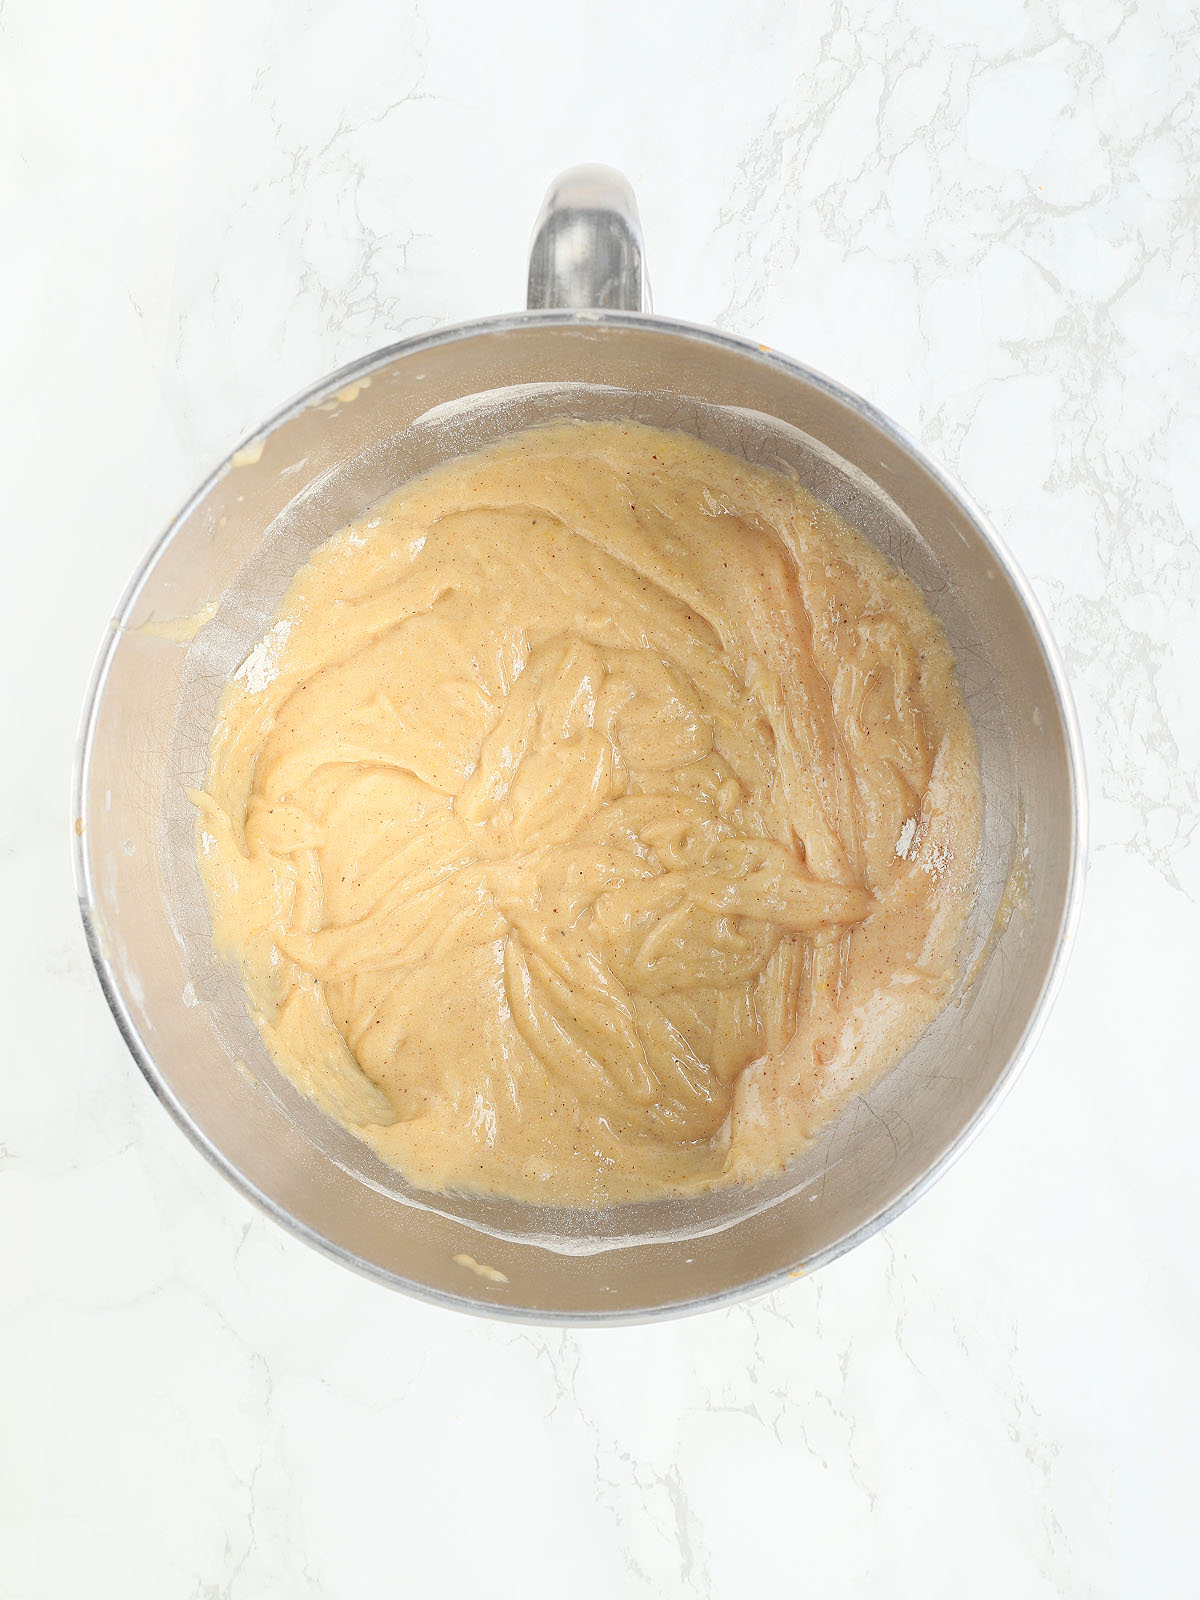 cake batter after flour, baking soda, salt and spices have been mixed in